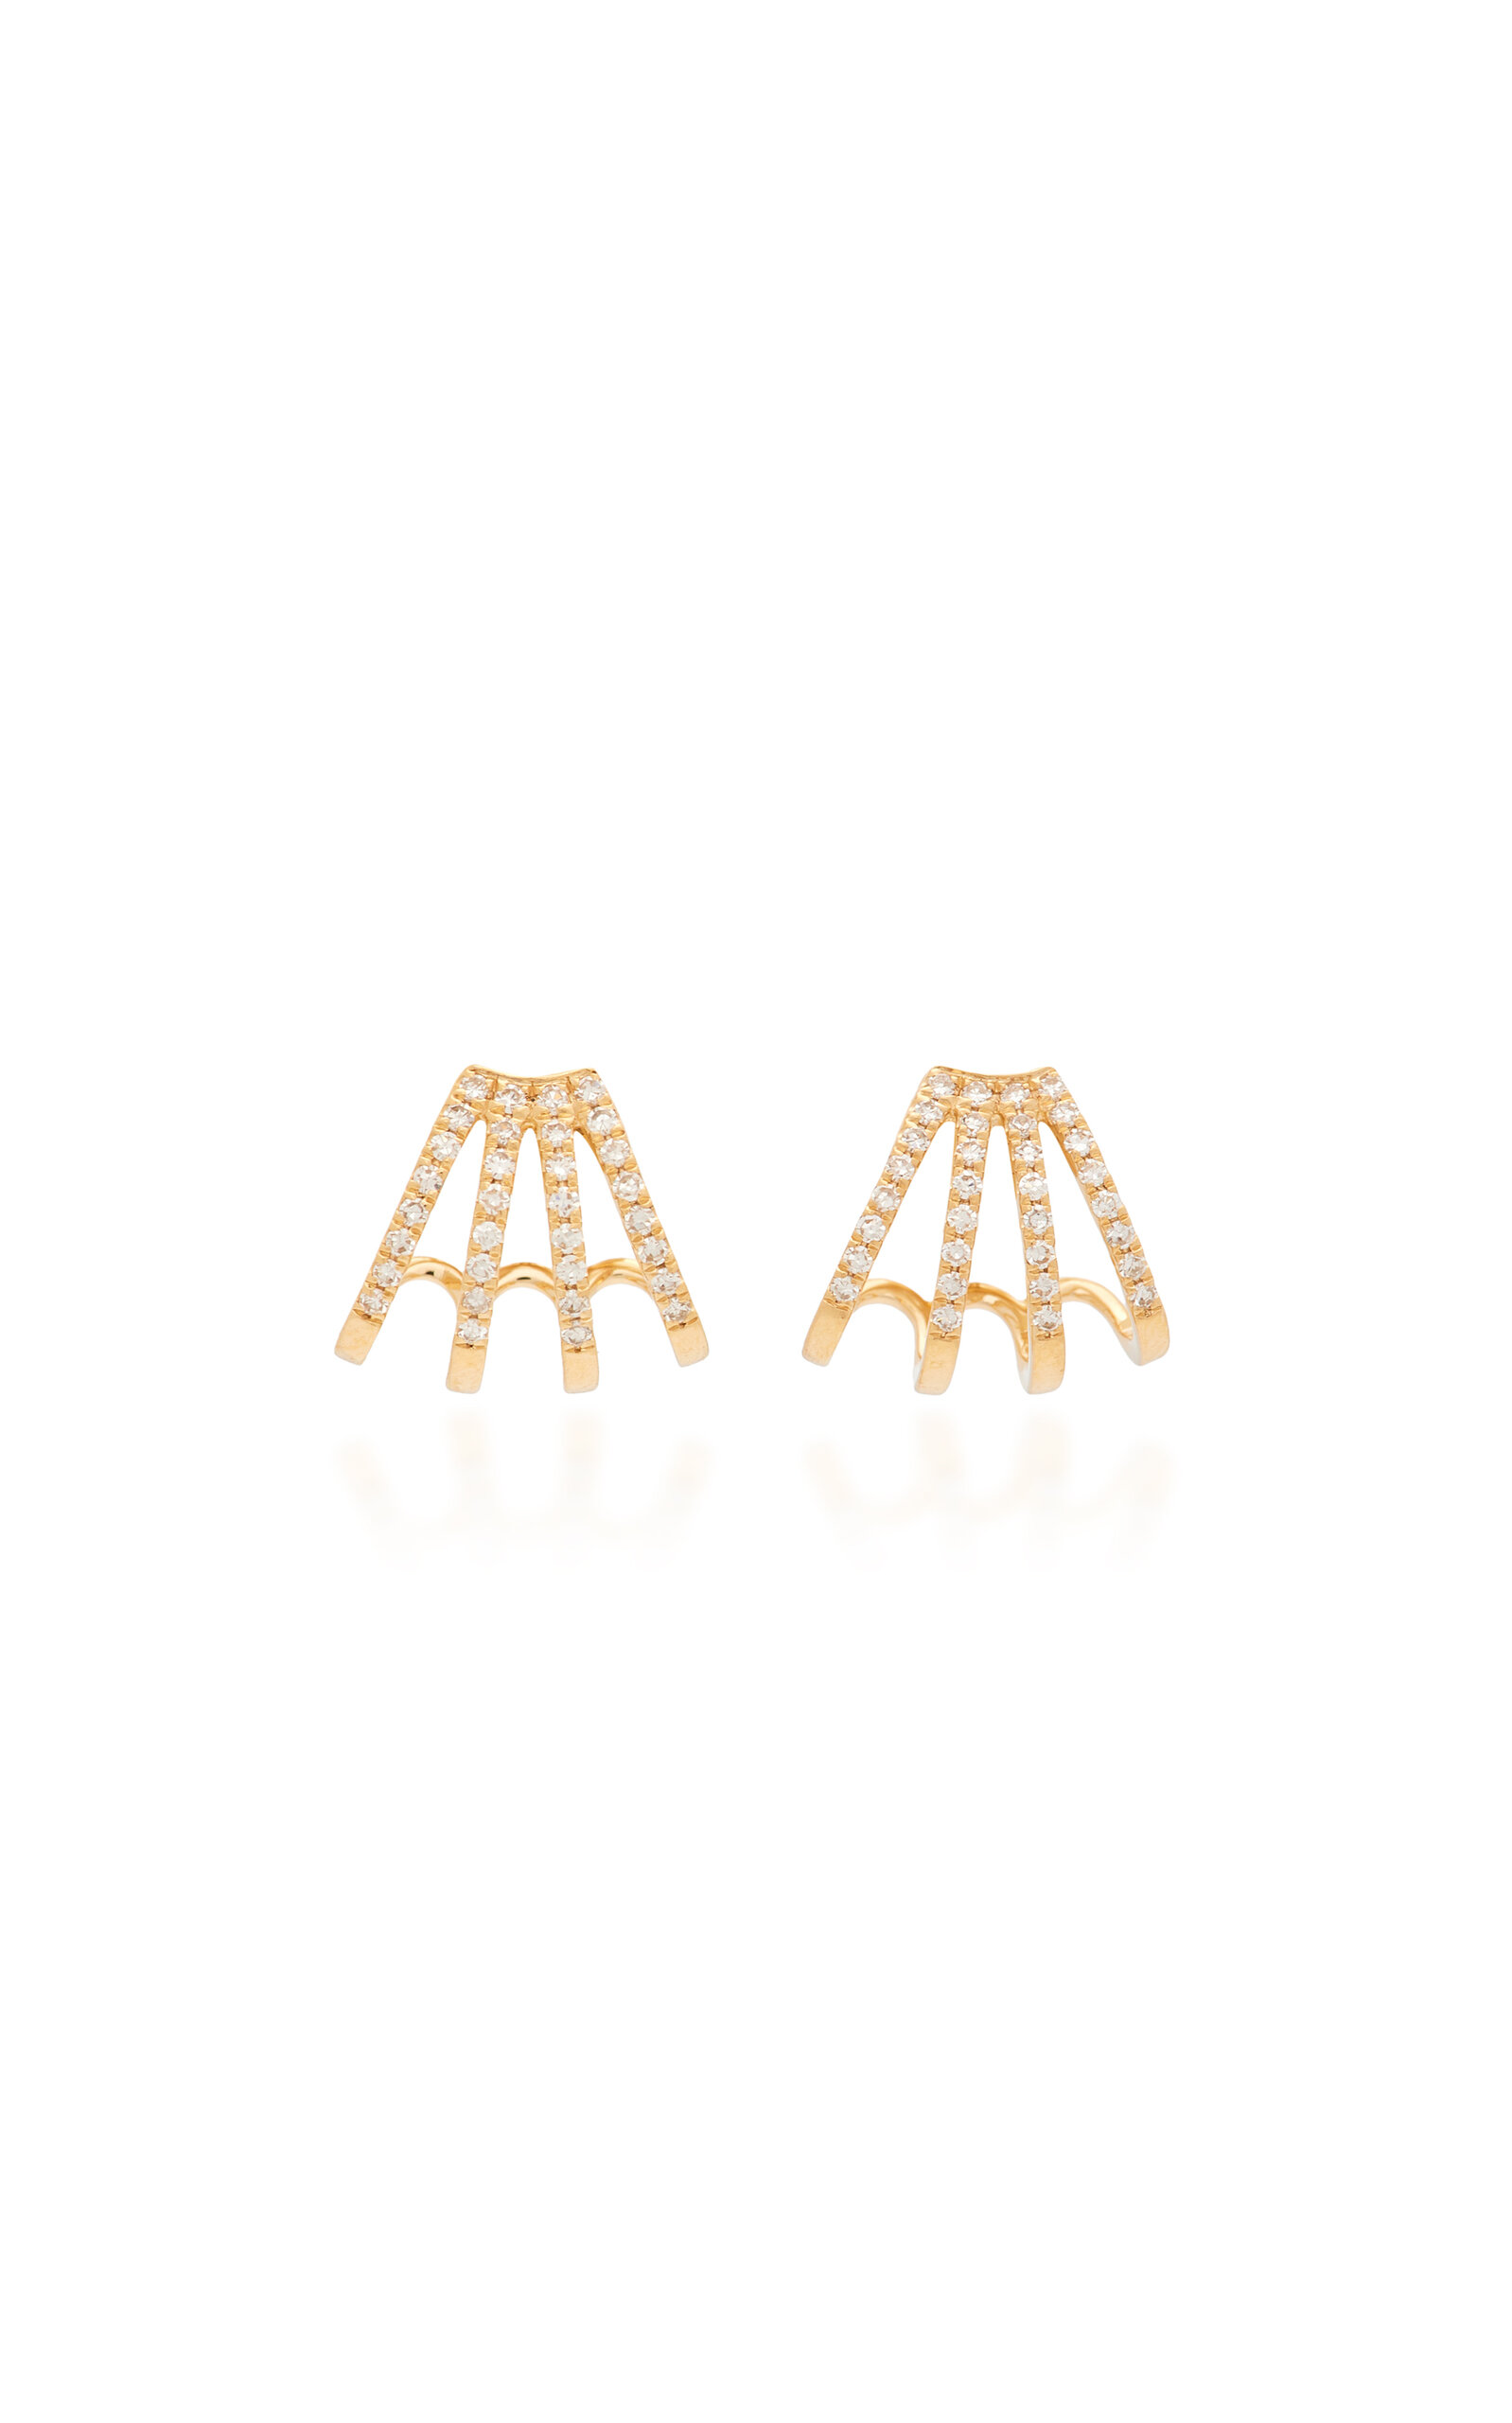 Ef Collection 14k Gold Diamond Earrings